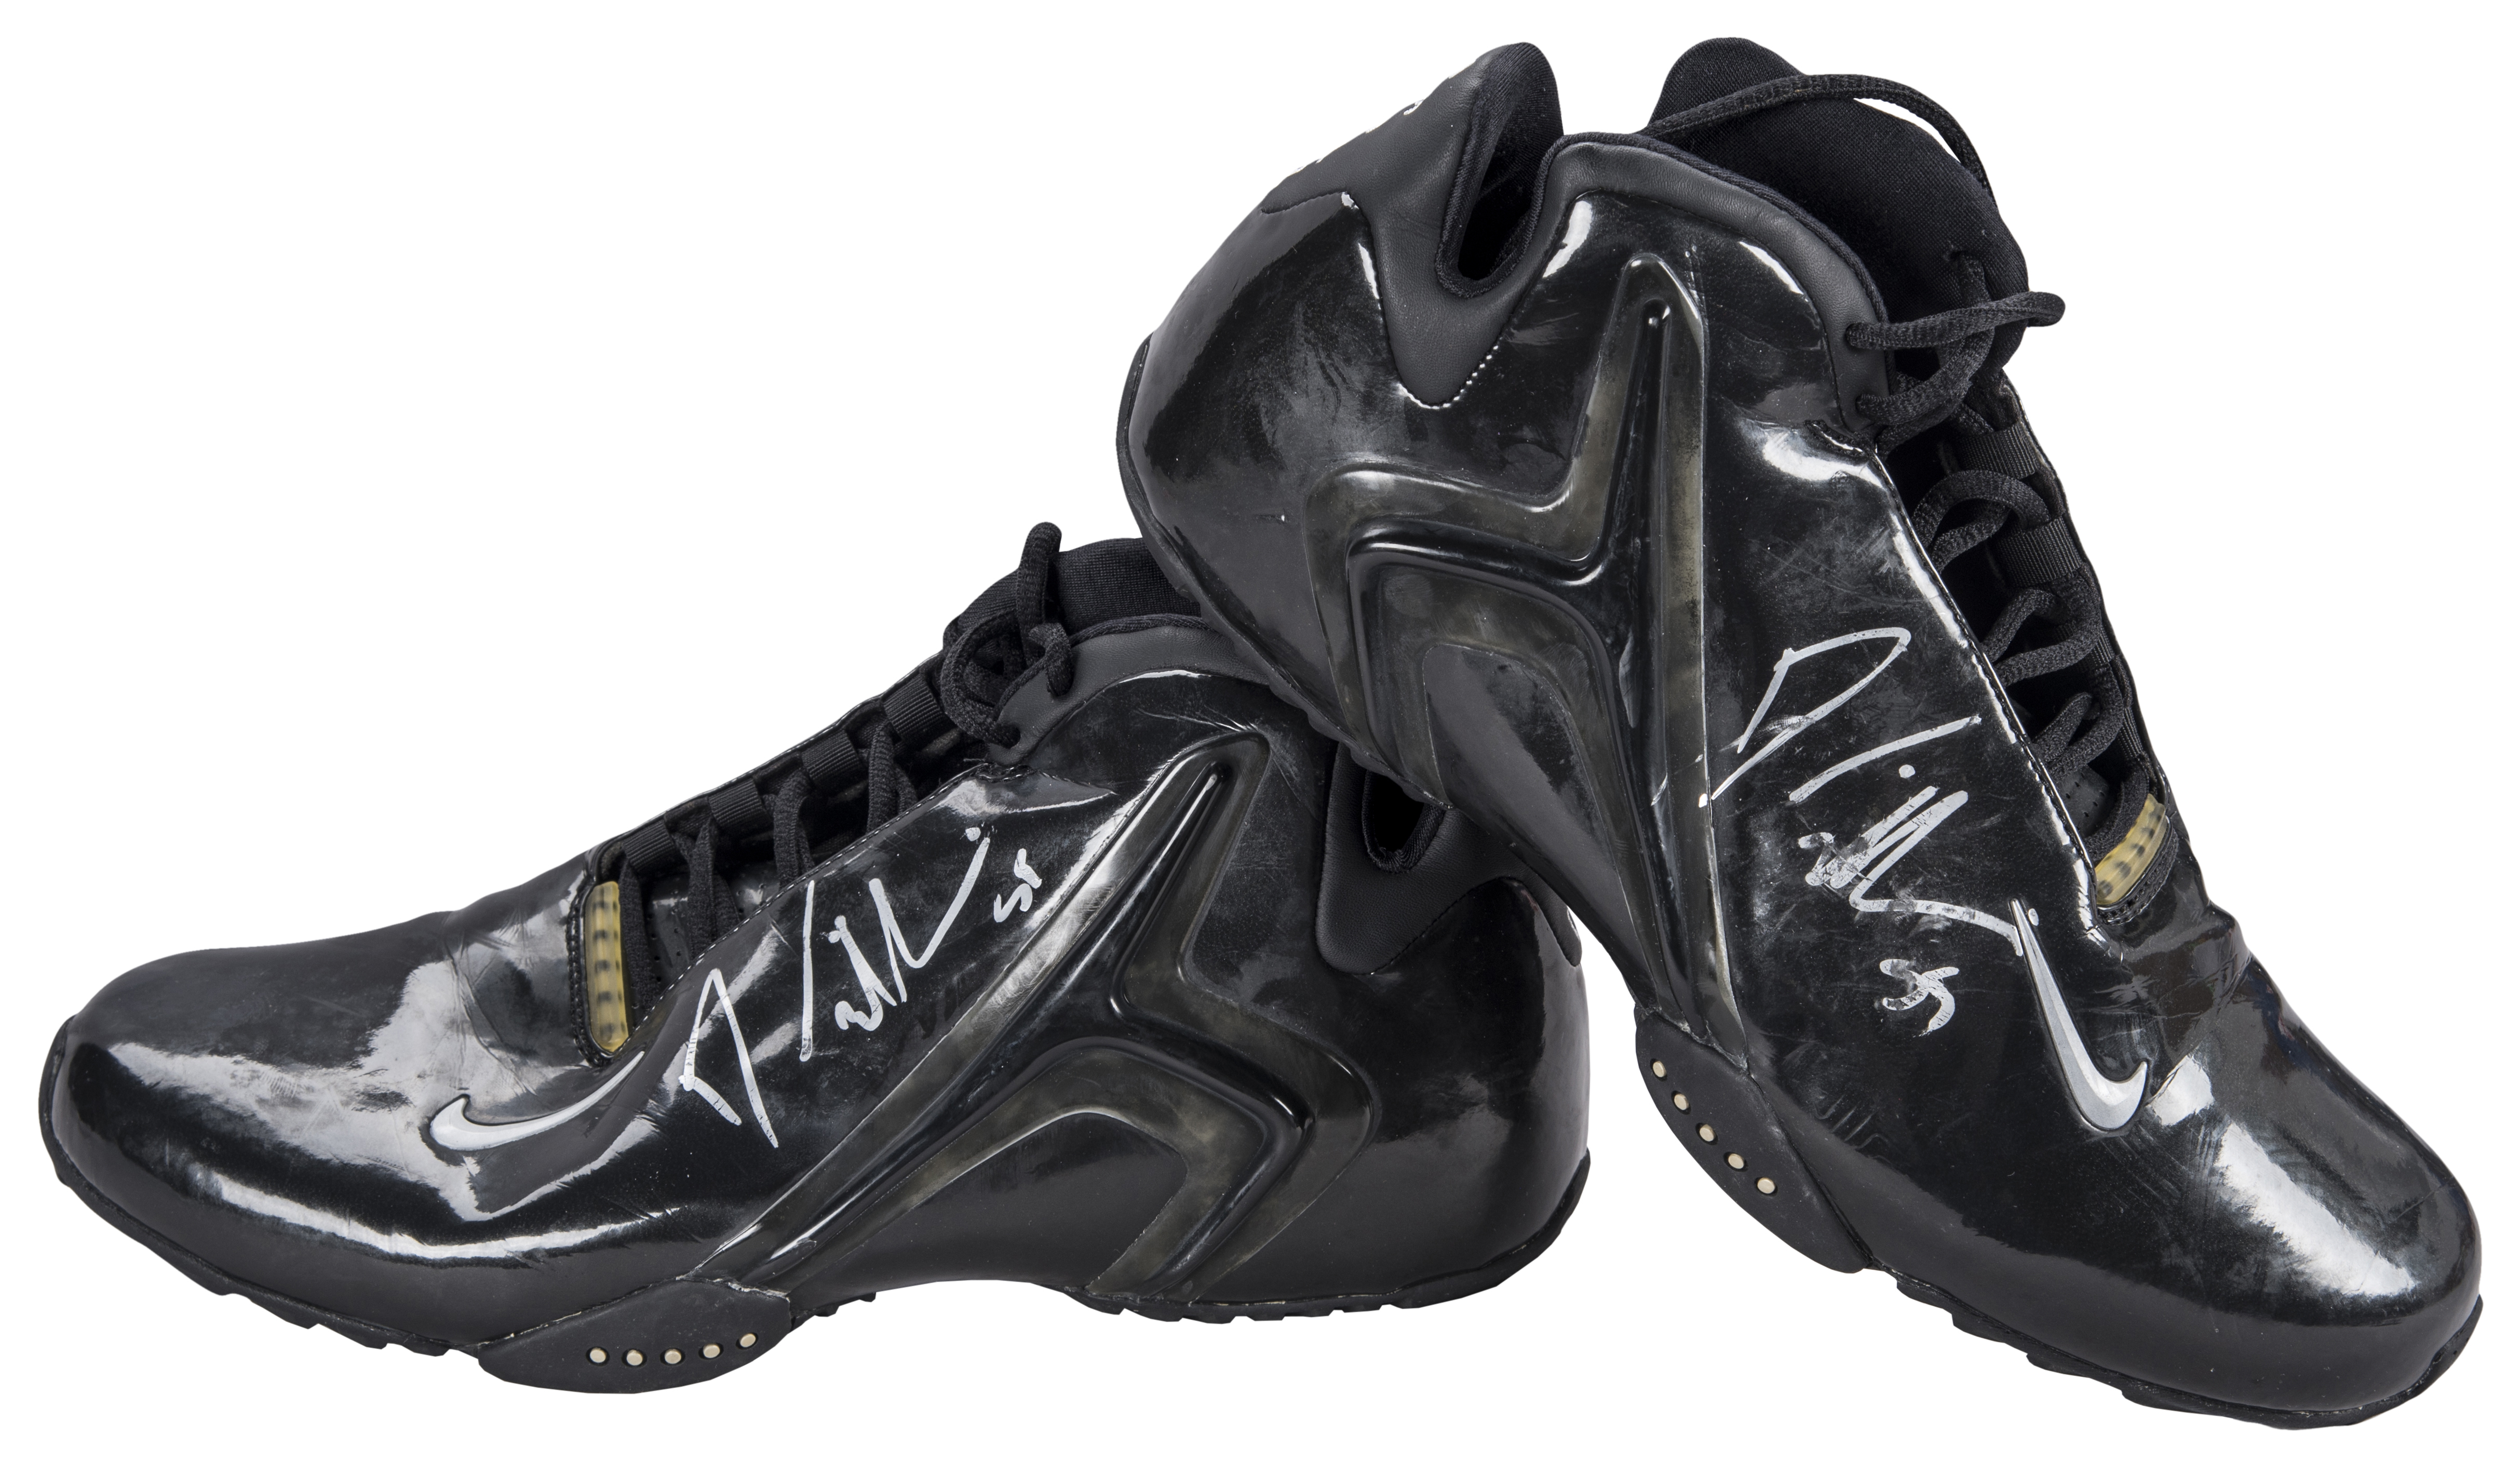 At Auction: Dikembe Mutombo autographed professional model sneakers  c.1992-93.